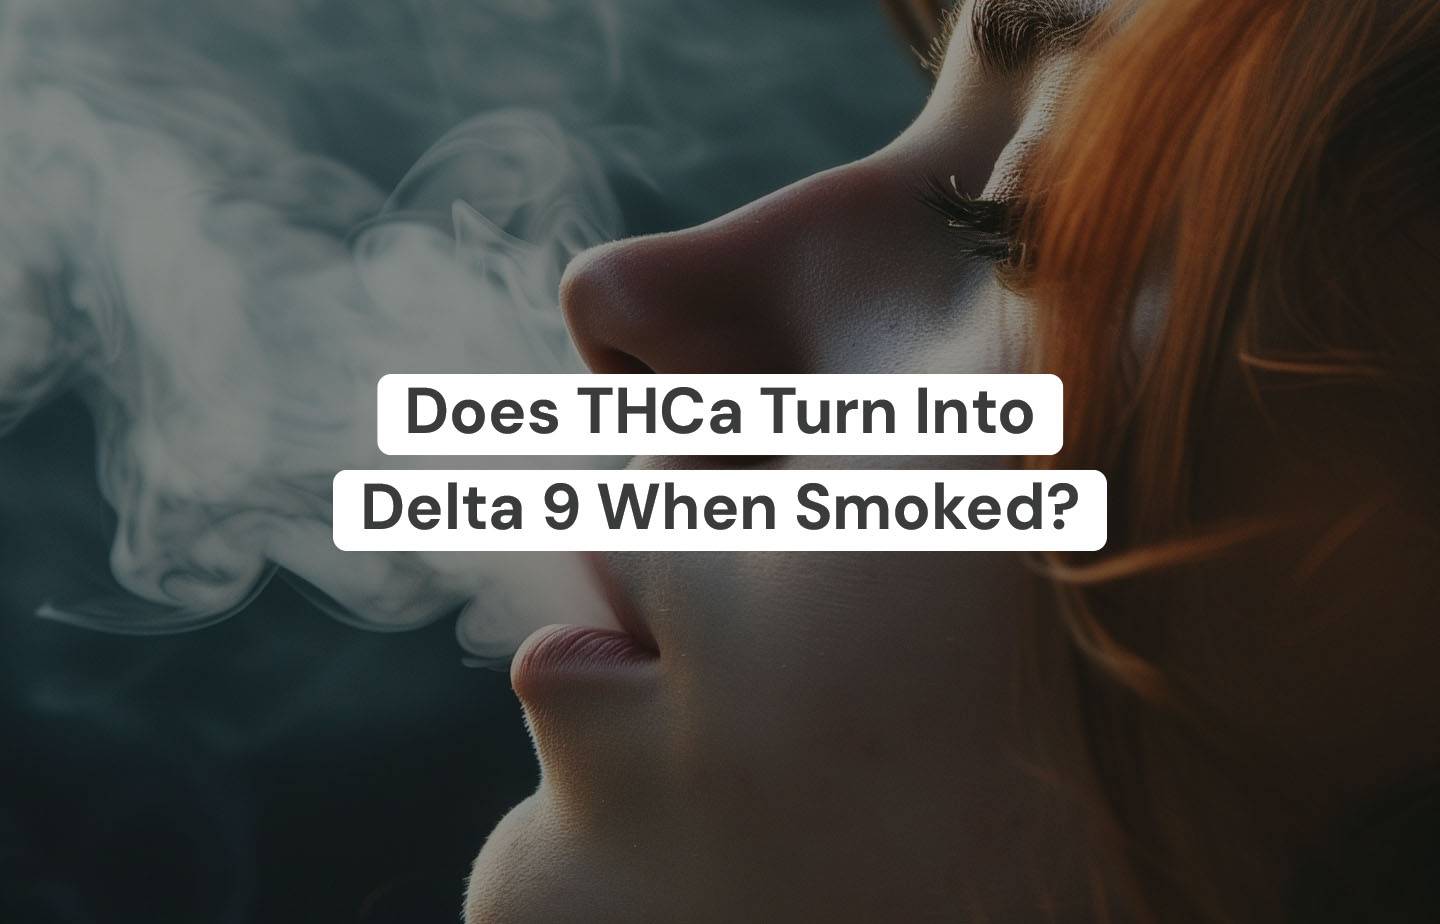 Does THCA Turn Into Delta 9 When Smoked?